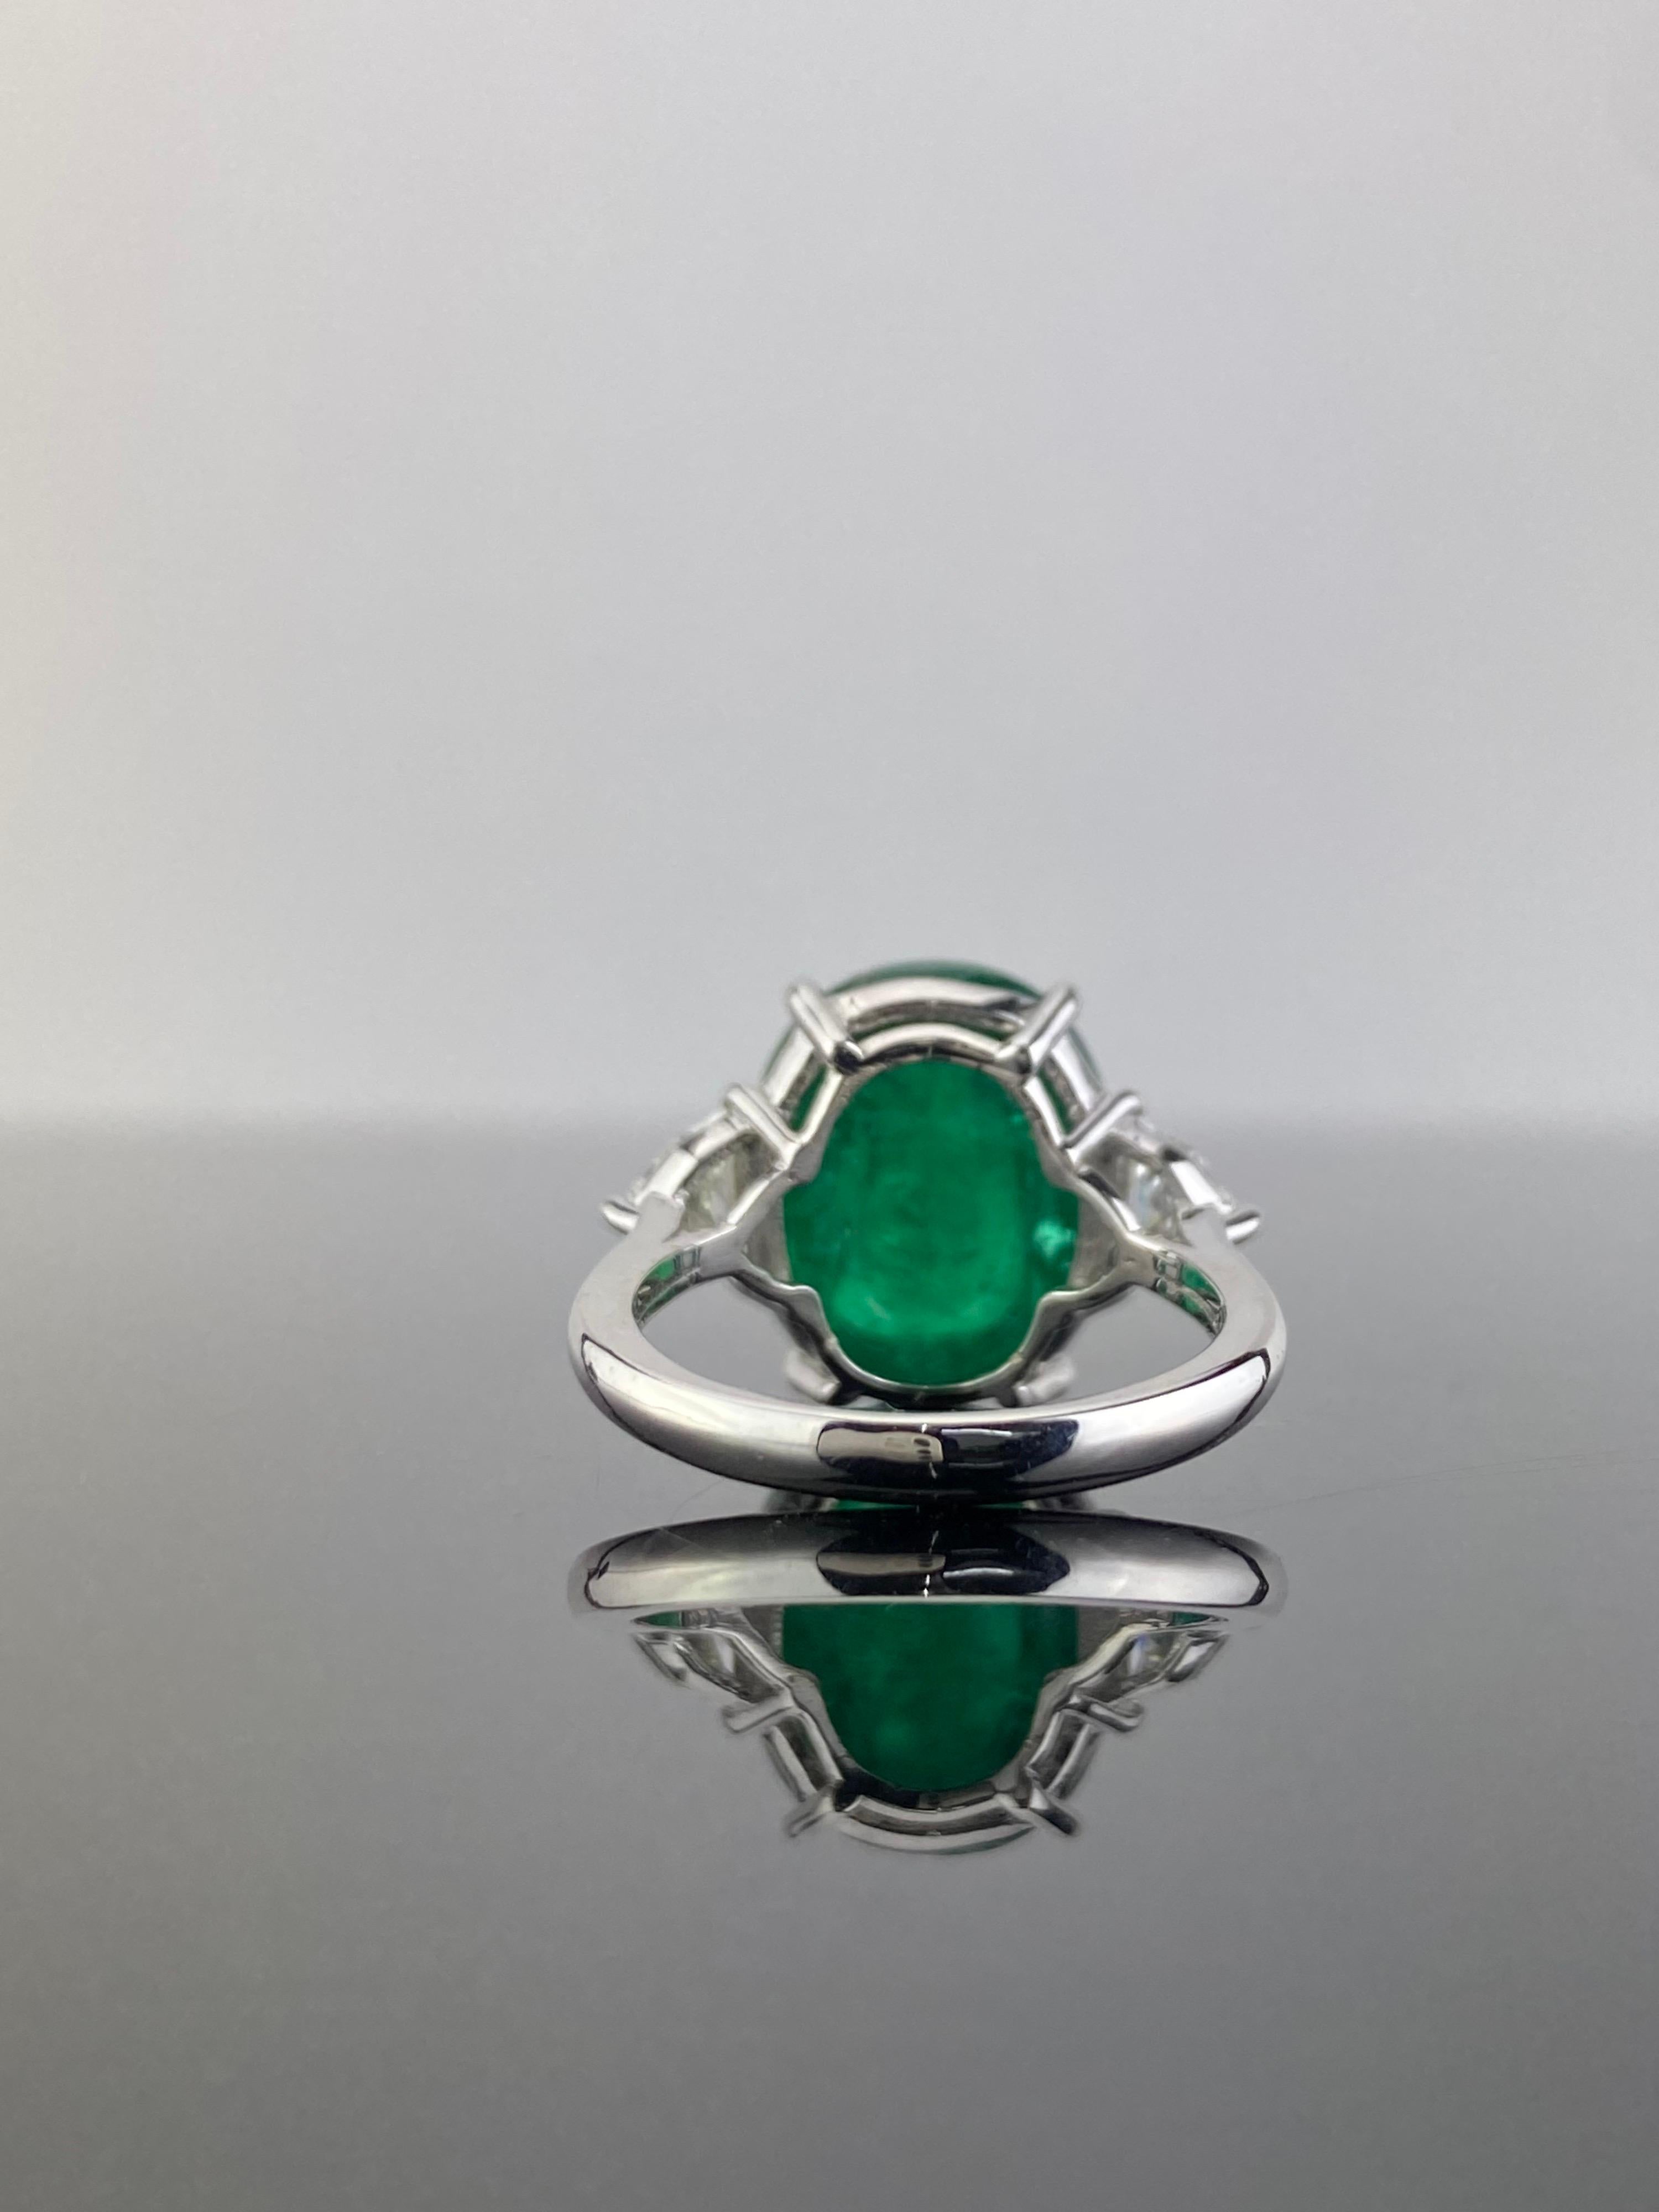 A 10.55 carat sugarloaf shaped Zambian Emerald and 0.59 carat cadillac shaped White Diamonds three stone engagement ring, set in solid 18K White Gold. The Emerald is transparent, with an ideal vivid green color and great luster. The ring is